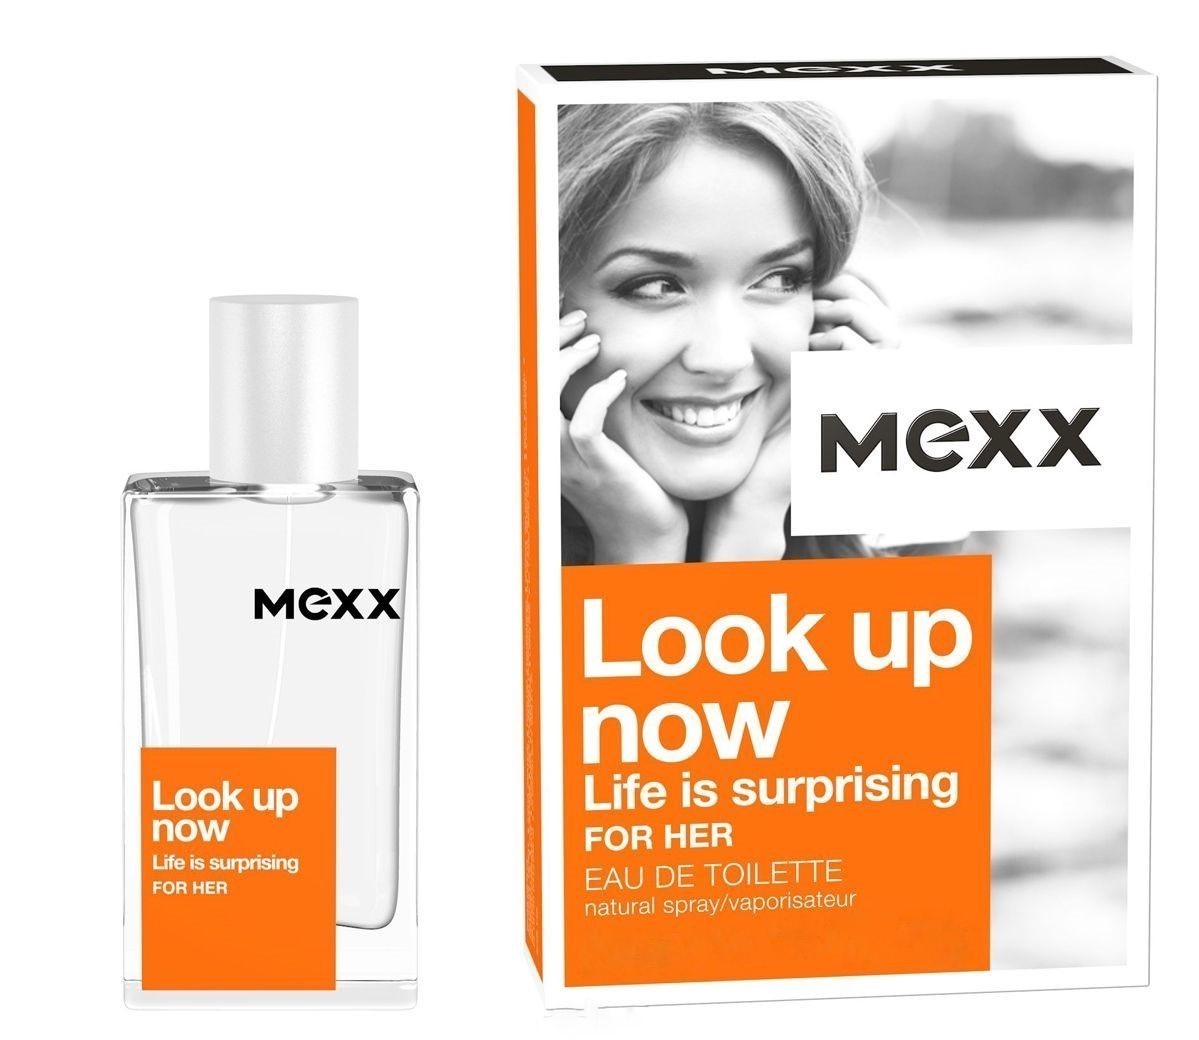 MEXX LOOK UP NOW LIFE IS SURPRISING FOR HER